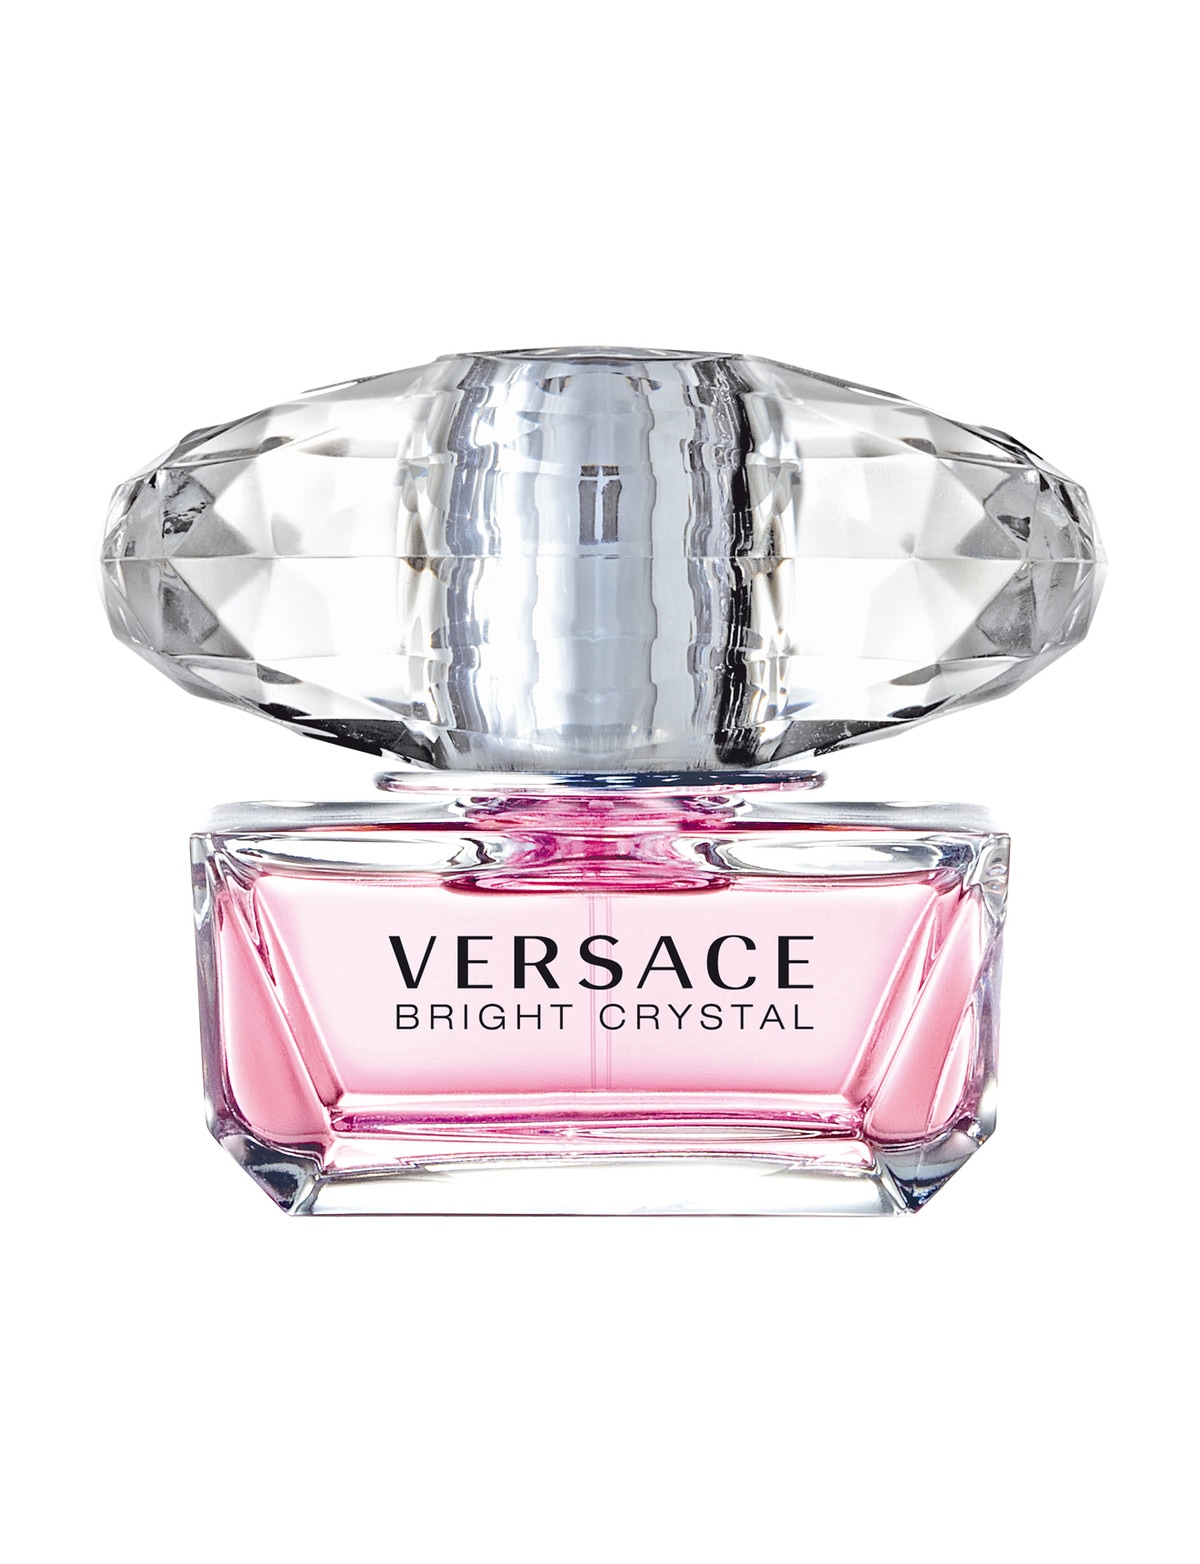 Versace Bright Crystal EDT - Women's Perfumes